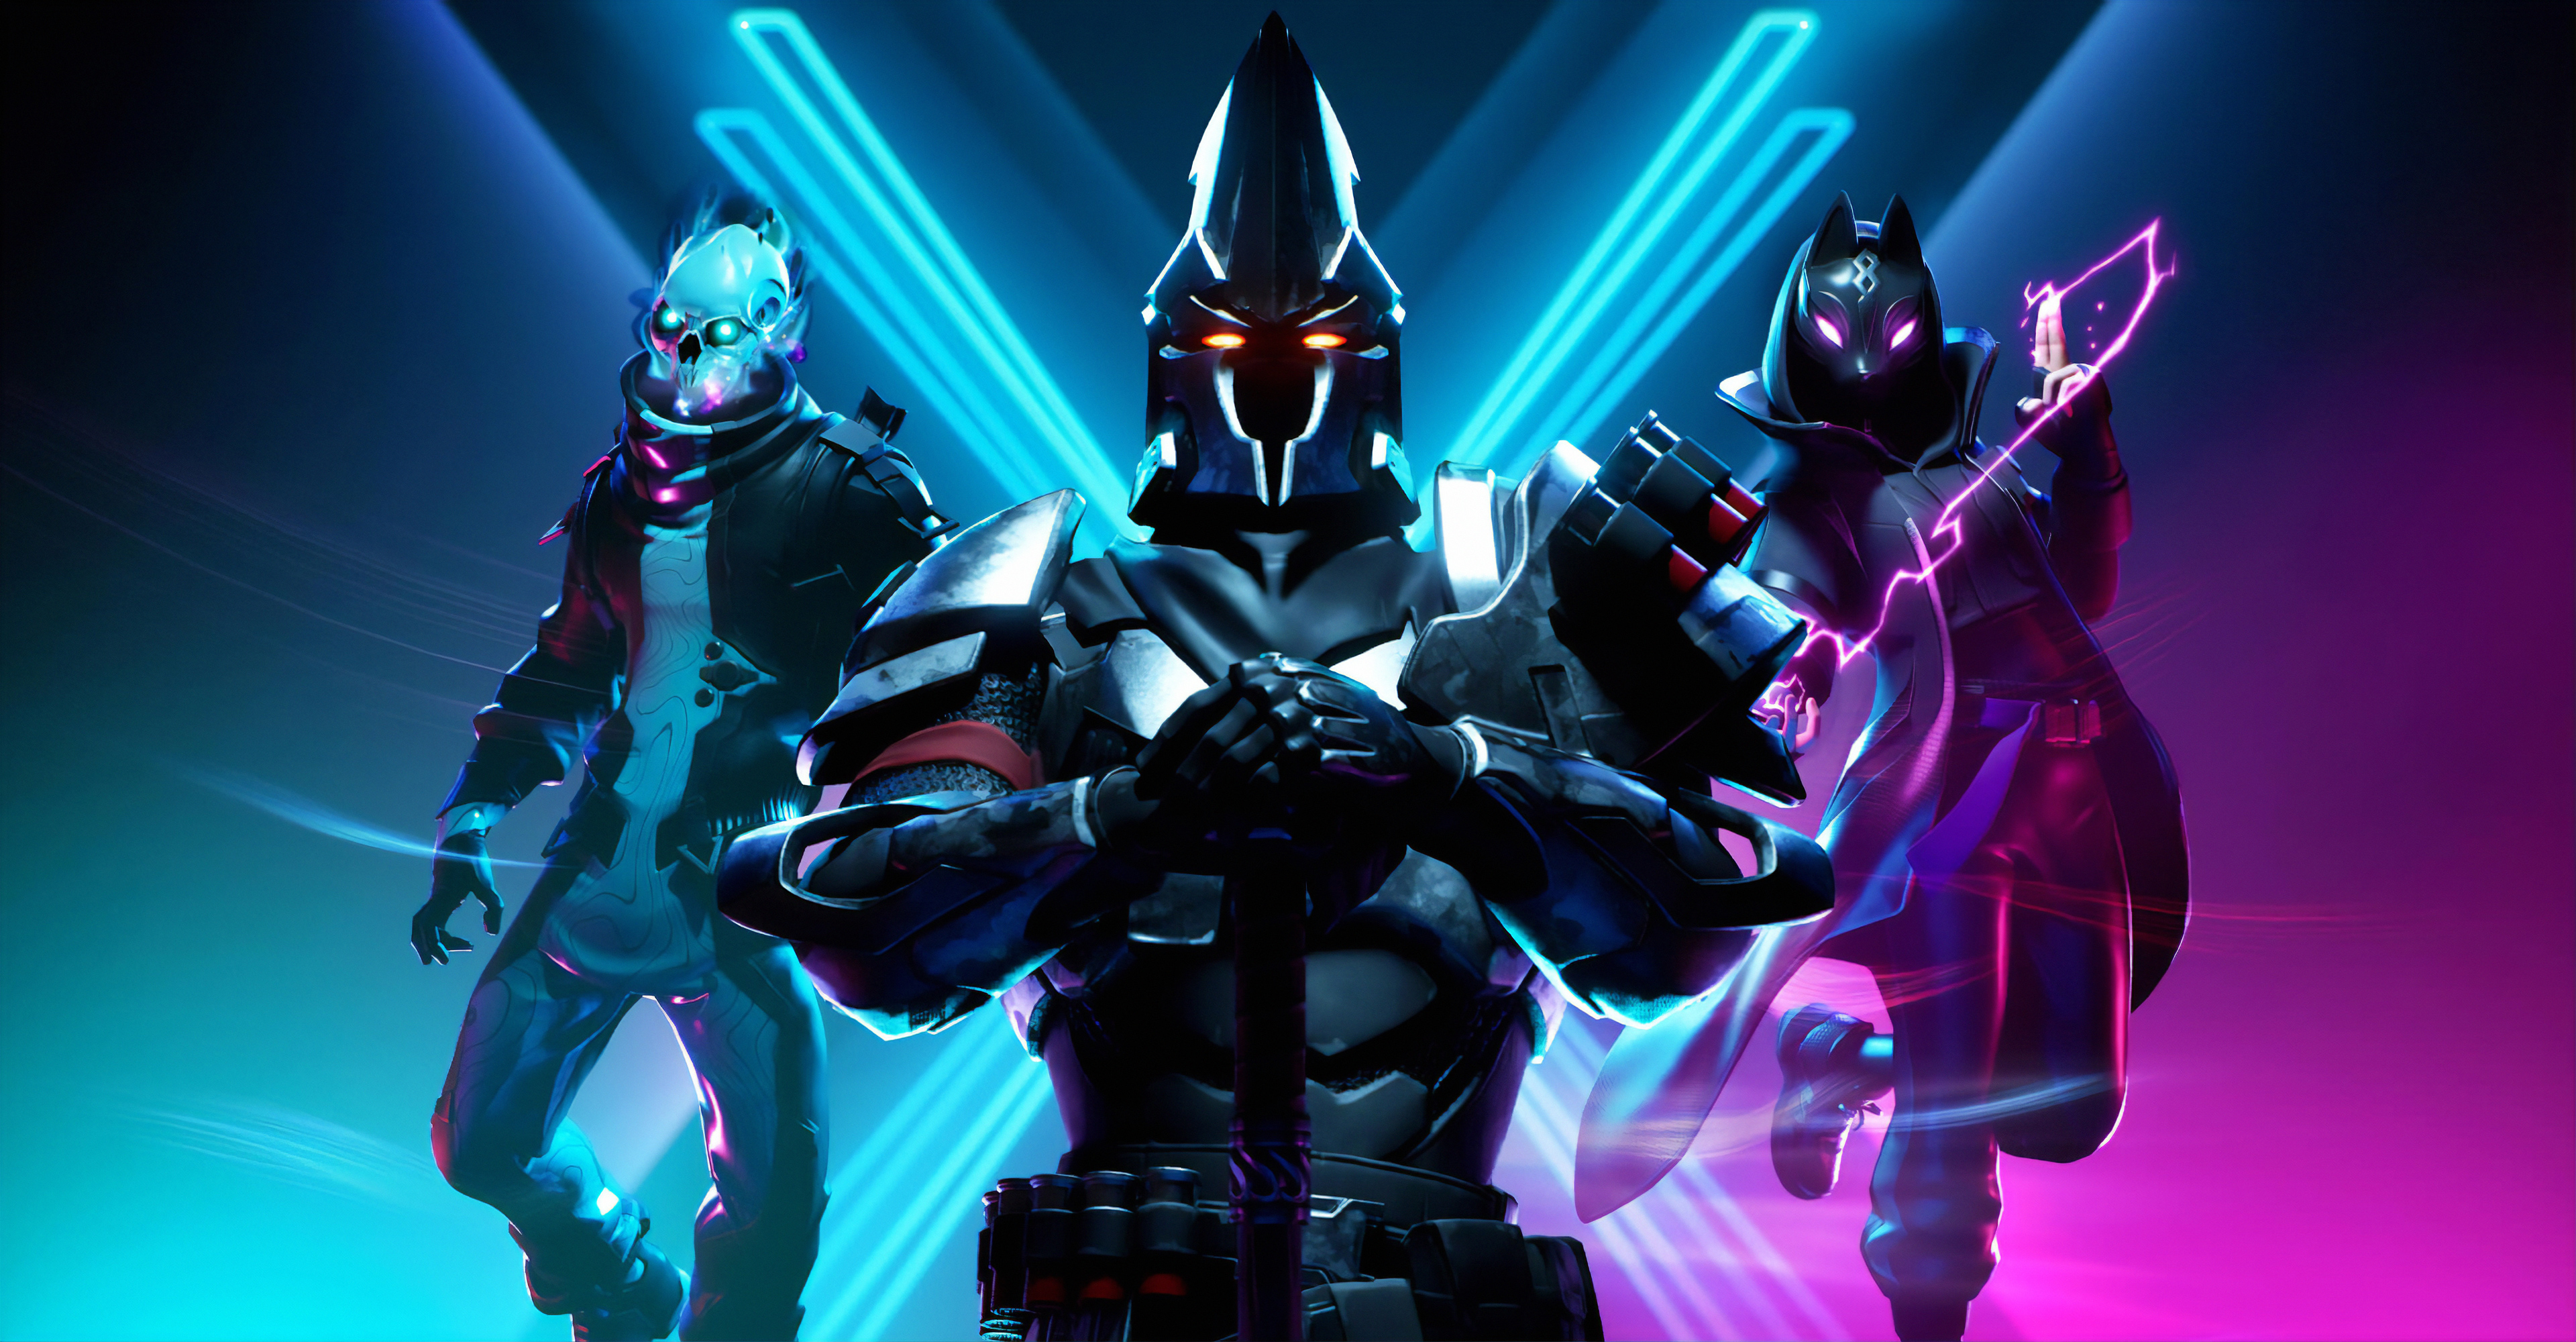 1440x2992 New Fortnite Battle Royale Season 1440x2992 Resolution Wallpaper Hd Games 4k Wallpapers Images Photos And Background